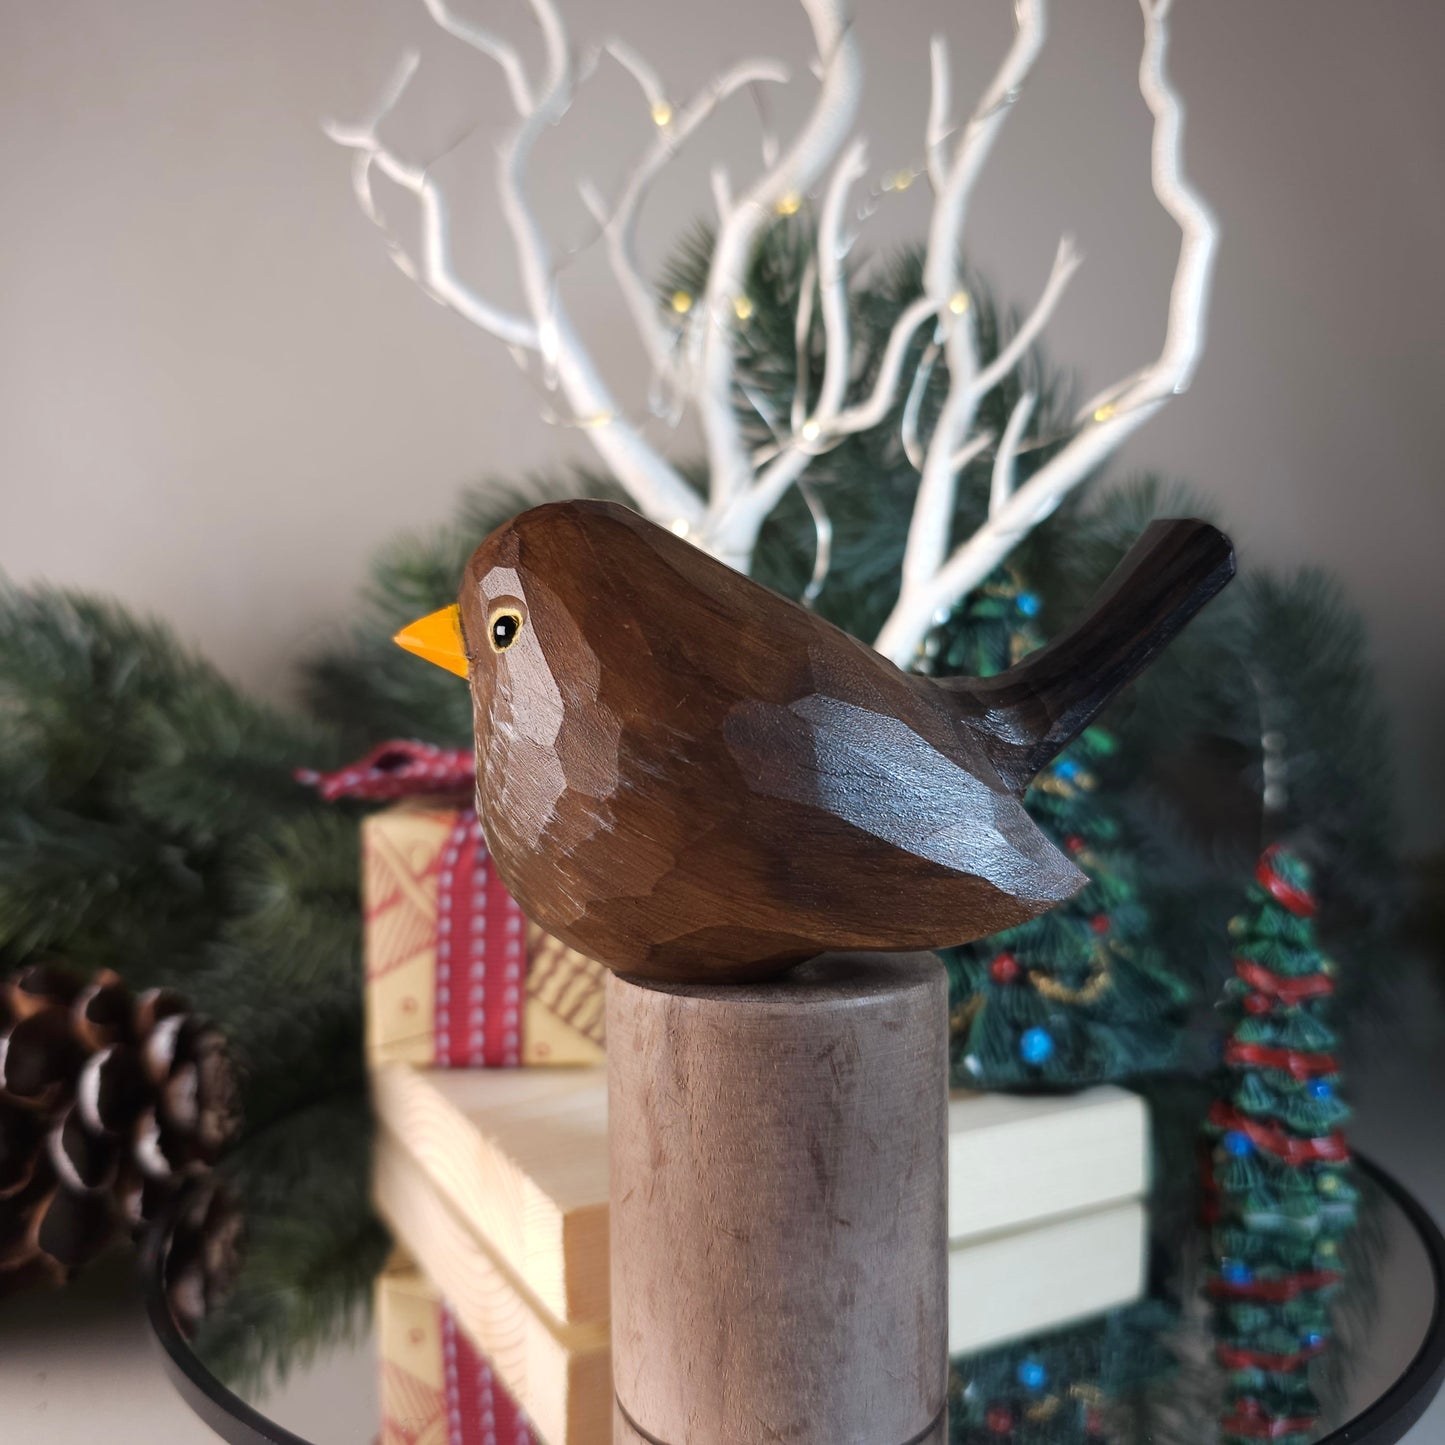 Artisanal Hand-Sculpted & Hand-Painted Wooden Blackbird Figurine - A Touch of Nature's Majesty - PAINTED BIRD SHOP